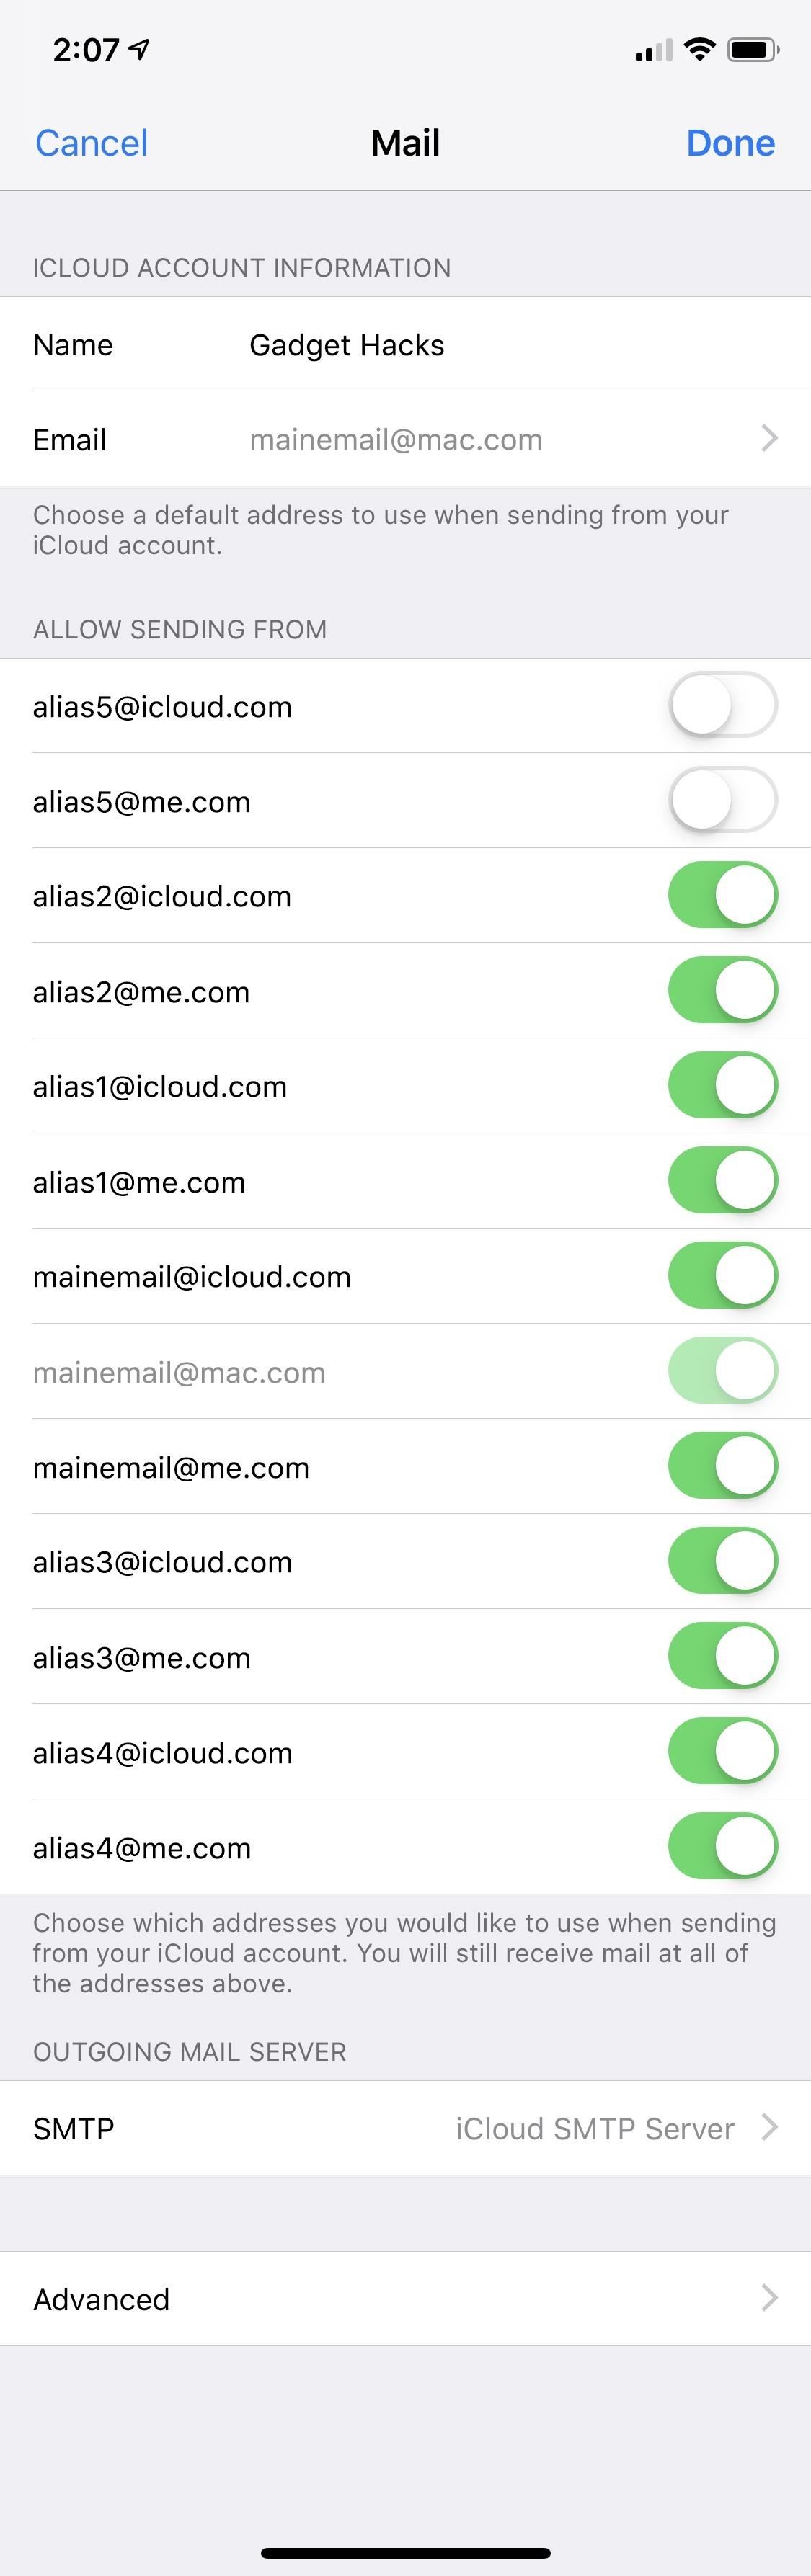 How to Hide @iCloud, @Me & Custom Aliases from Your Mail App's 'From' Field on Your iPhone